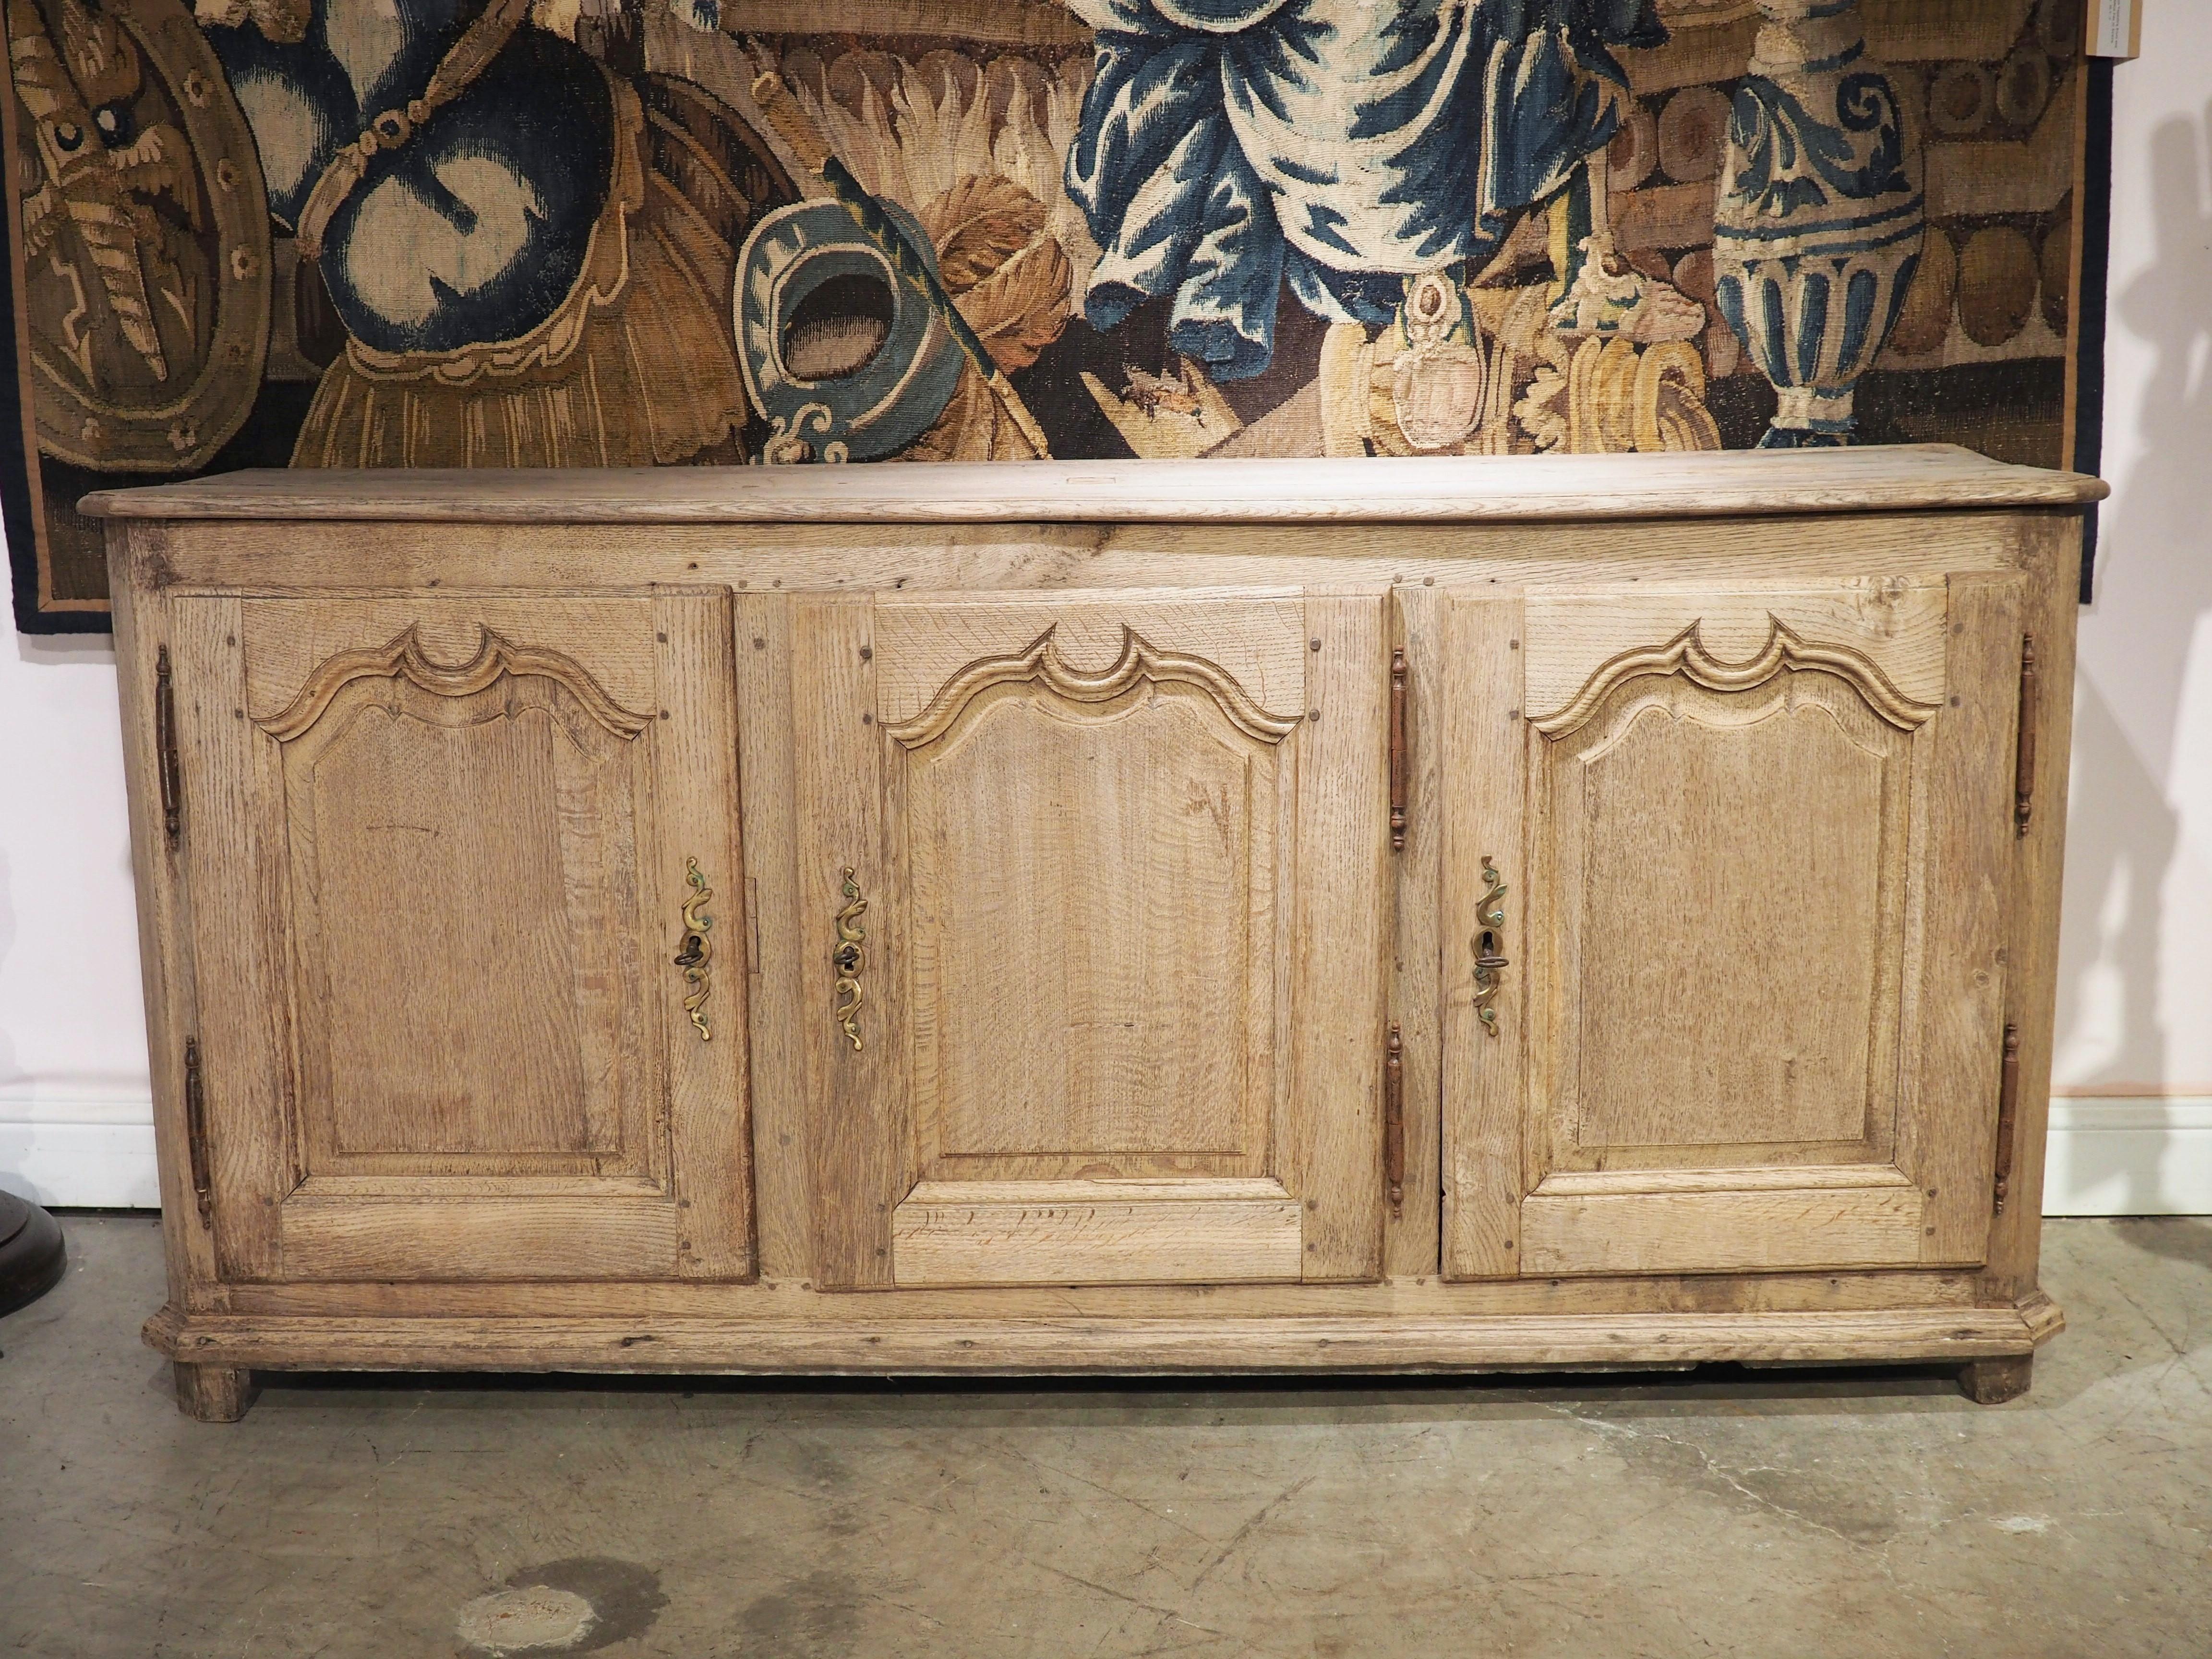 A French buffet constructed with more than two doors is referred to as an enfilade, (“row” in English). Our bleached oak enfilade was hand-carved in the 1700’s in the Louis XIV style, most likely in the North of France.

Louis XIV furniture is